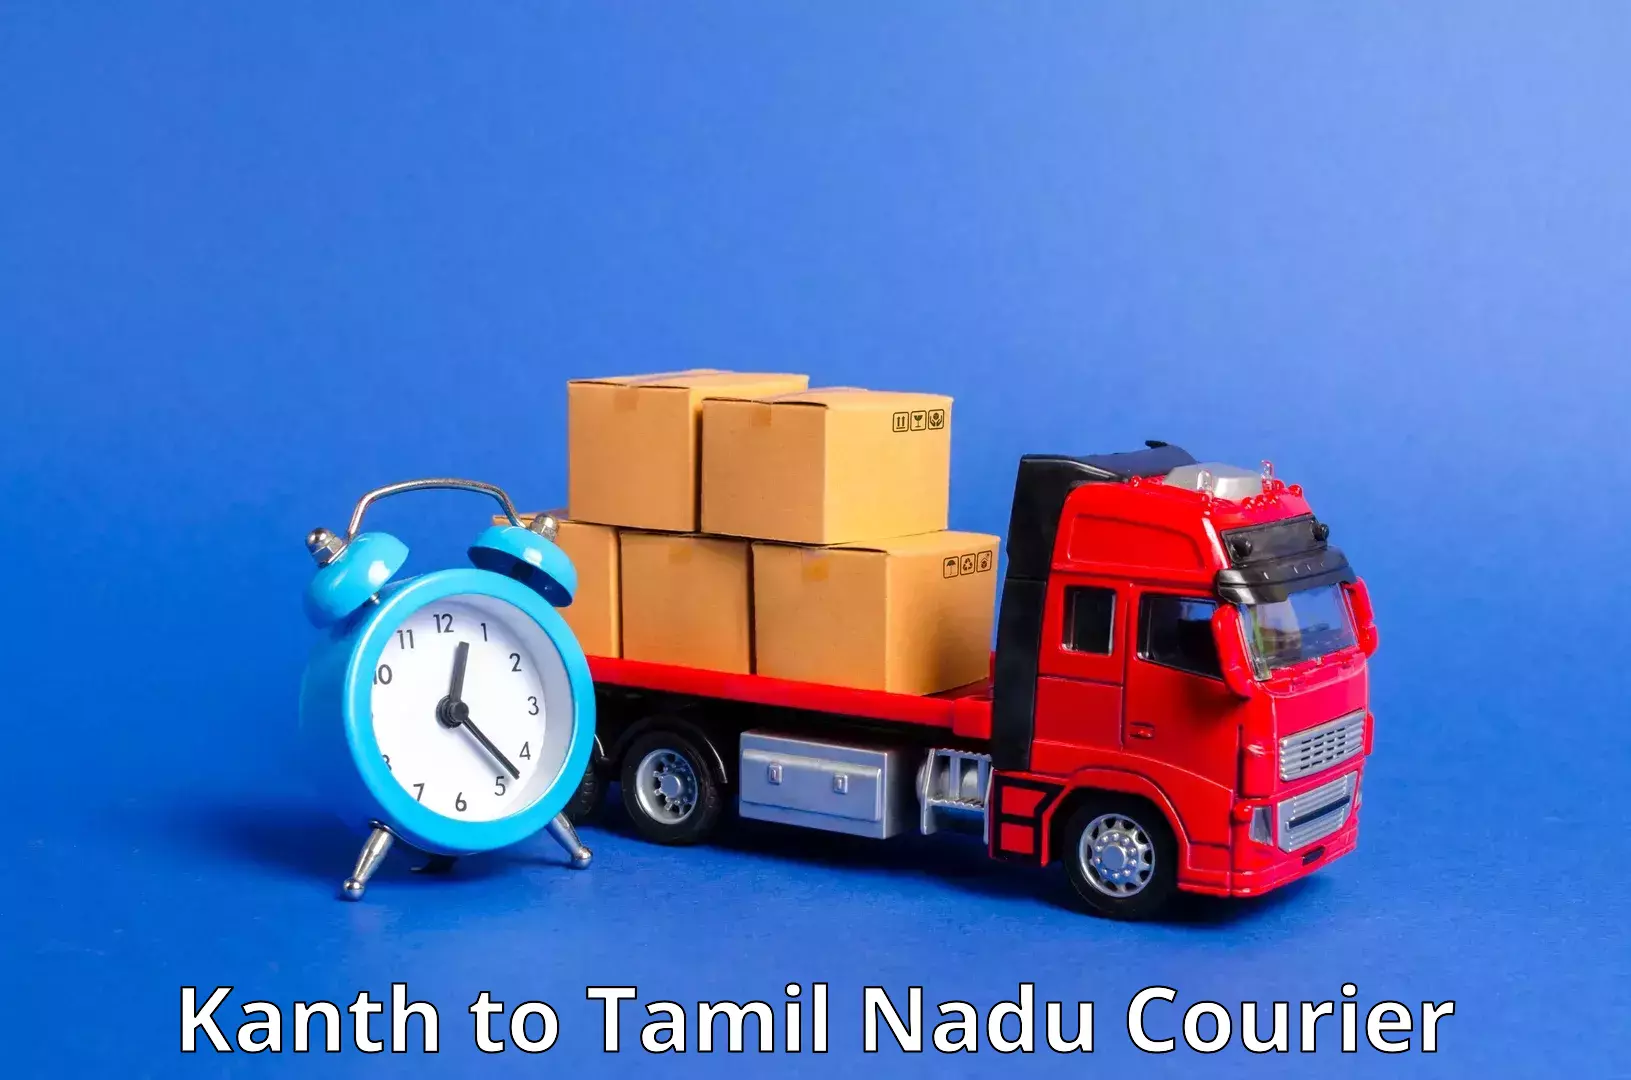 Comprehensive shipping services Kanth to Tirupur